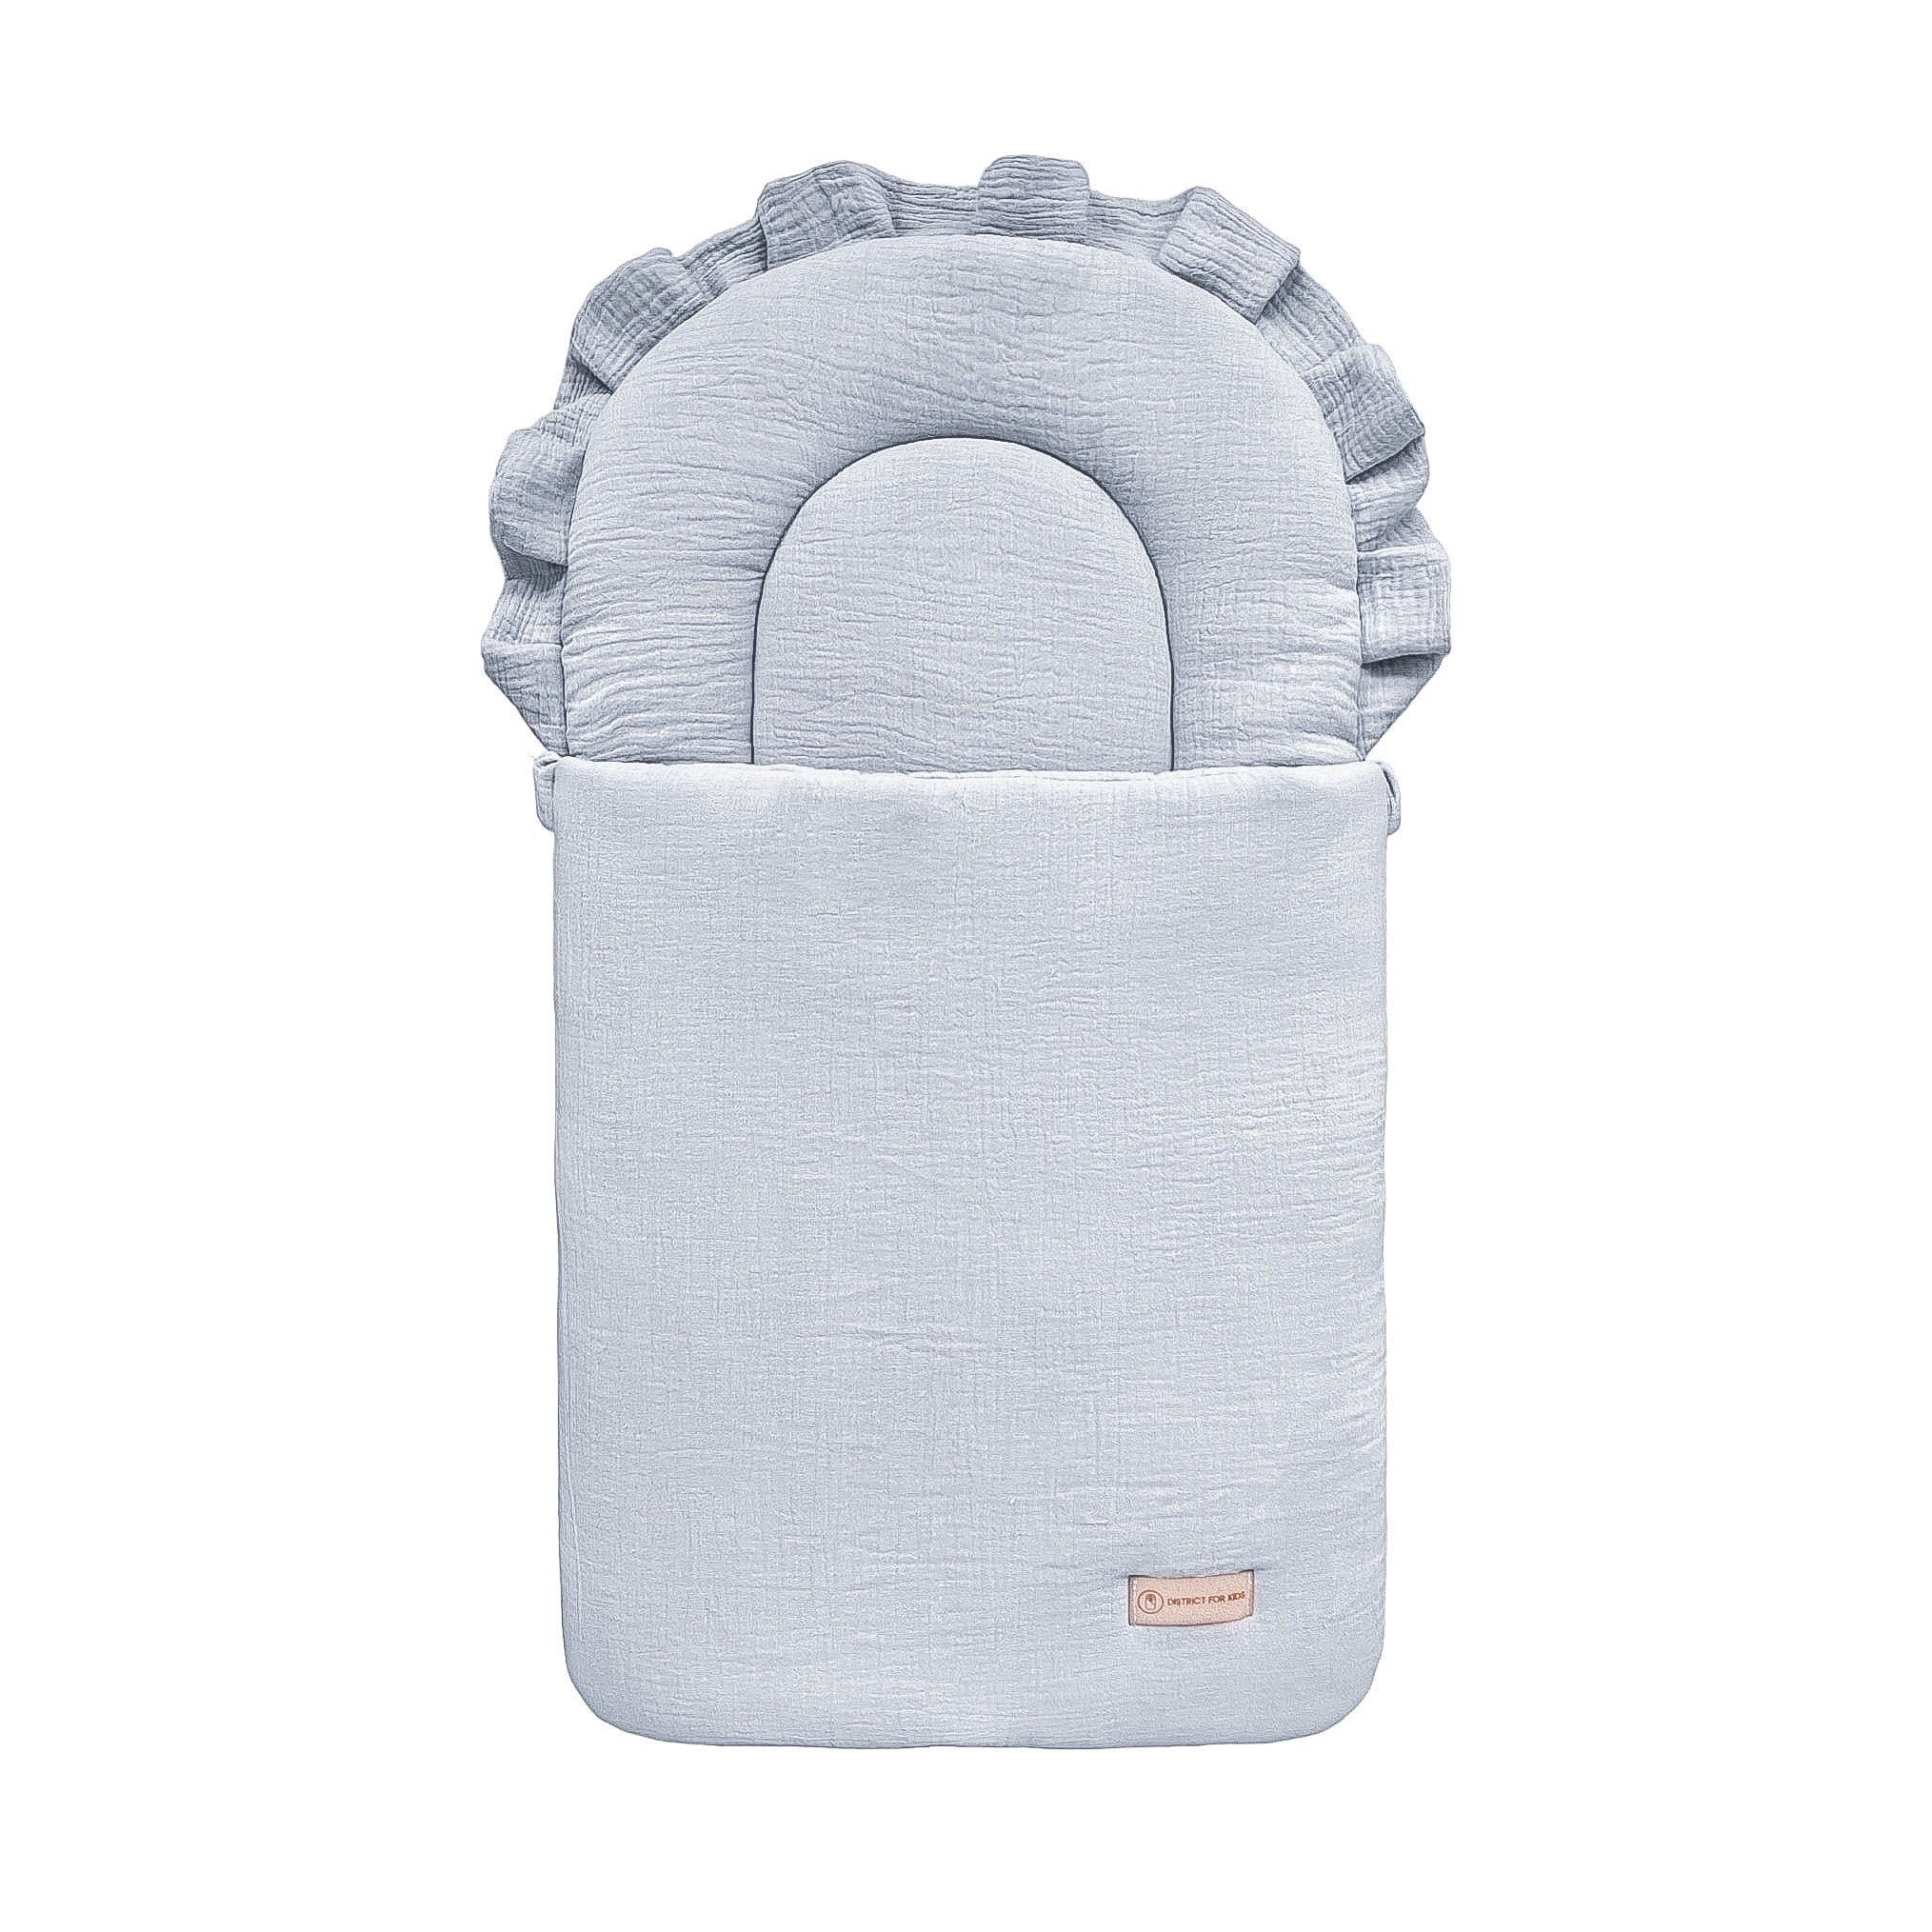 Babyschlafsack Musselin Dreamy | 2.5 TOG - District for Kids